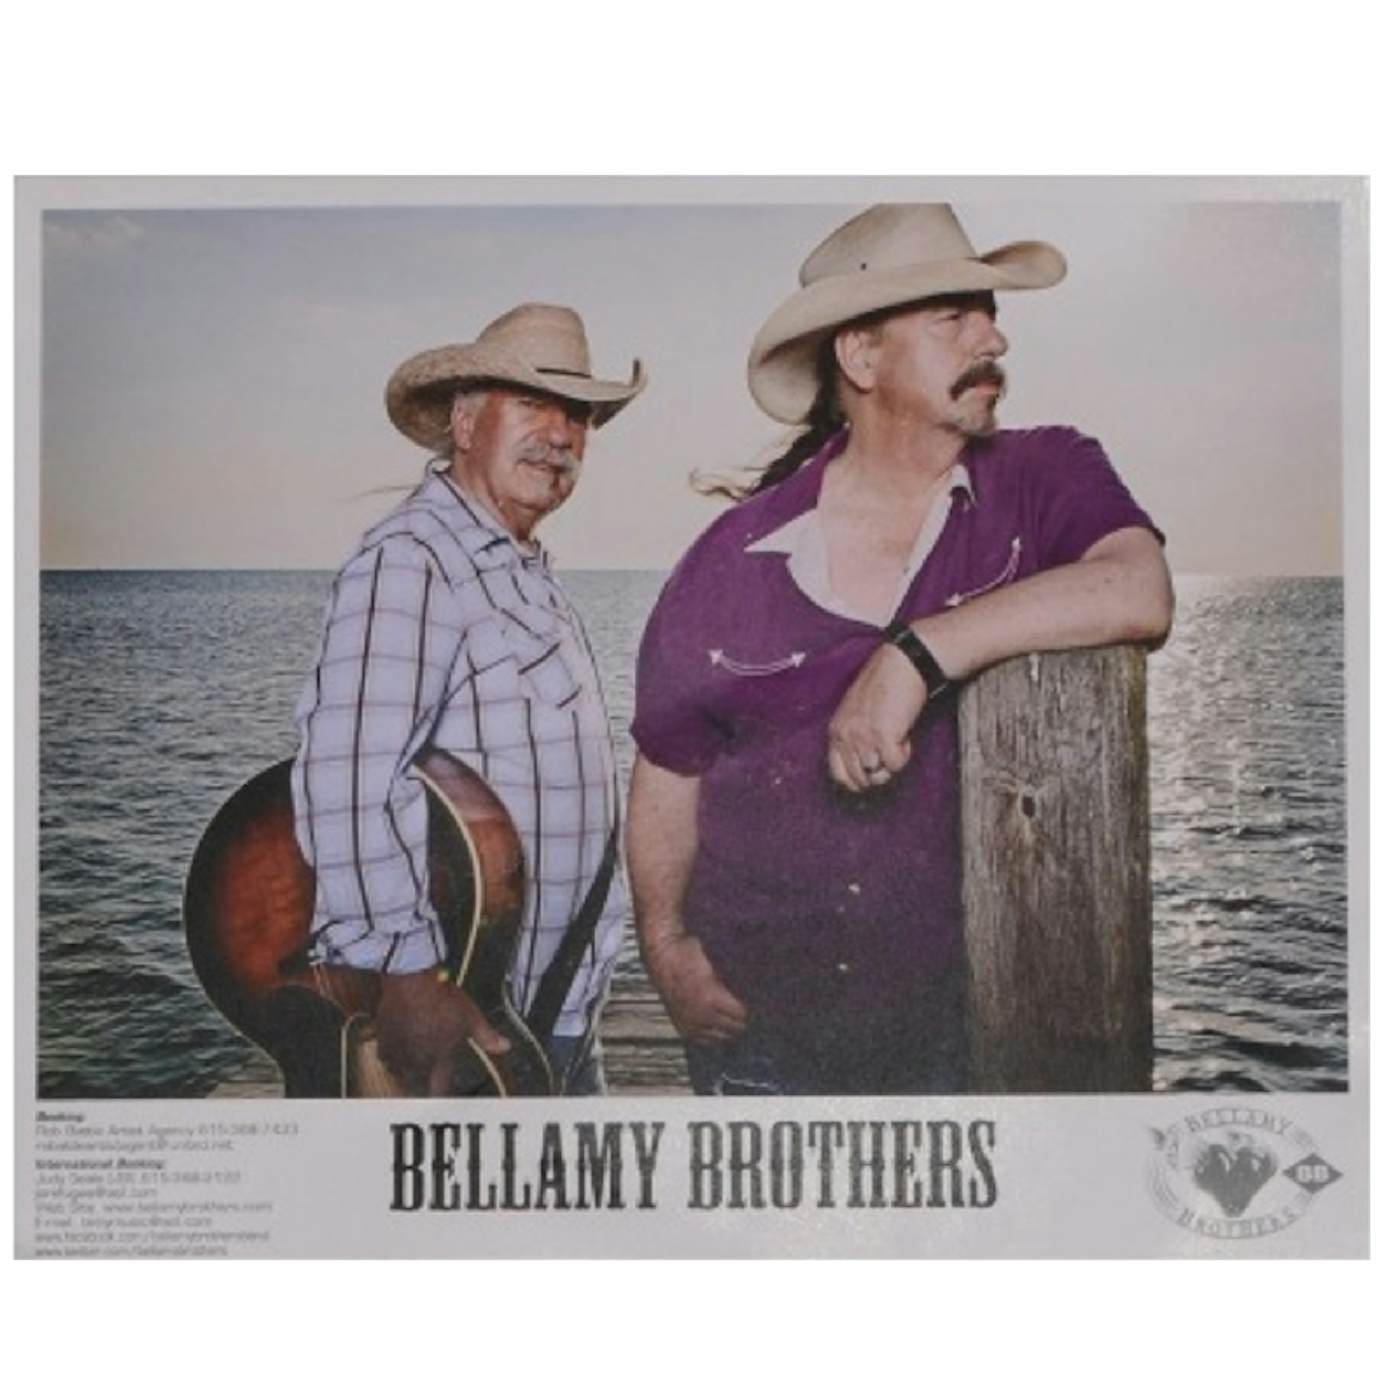 The Bellamy Brothers Bellamy Brother Color 8x10 Photo